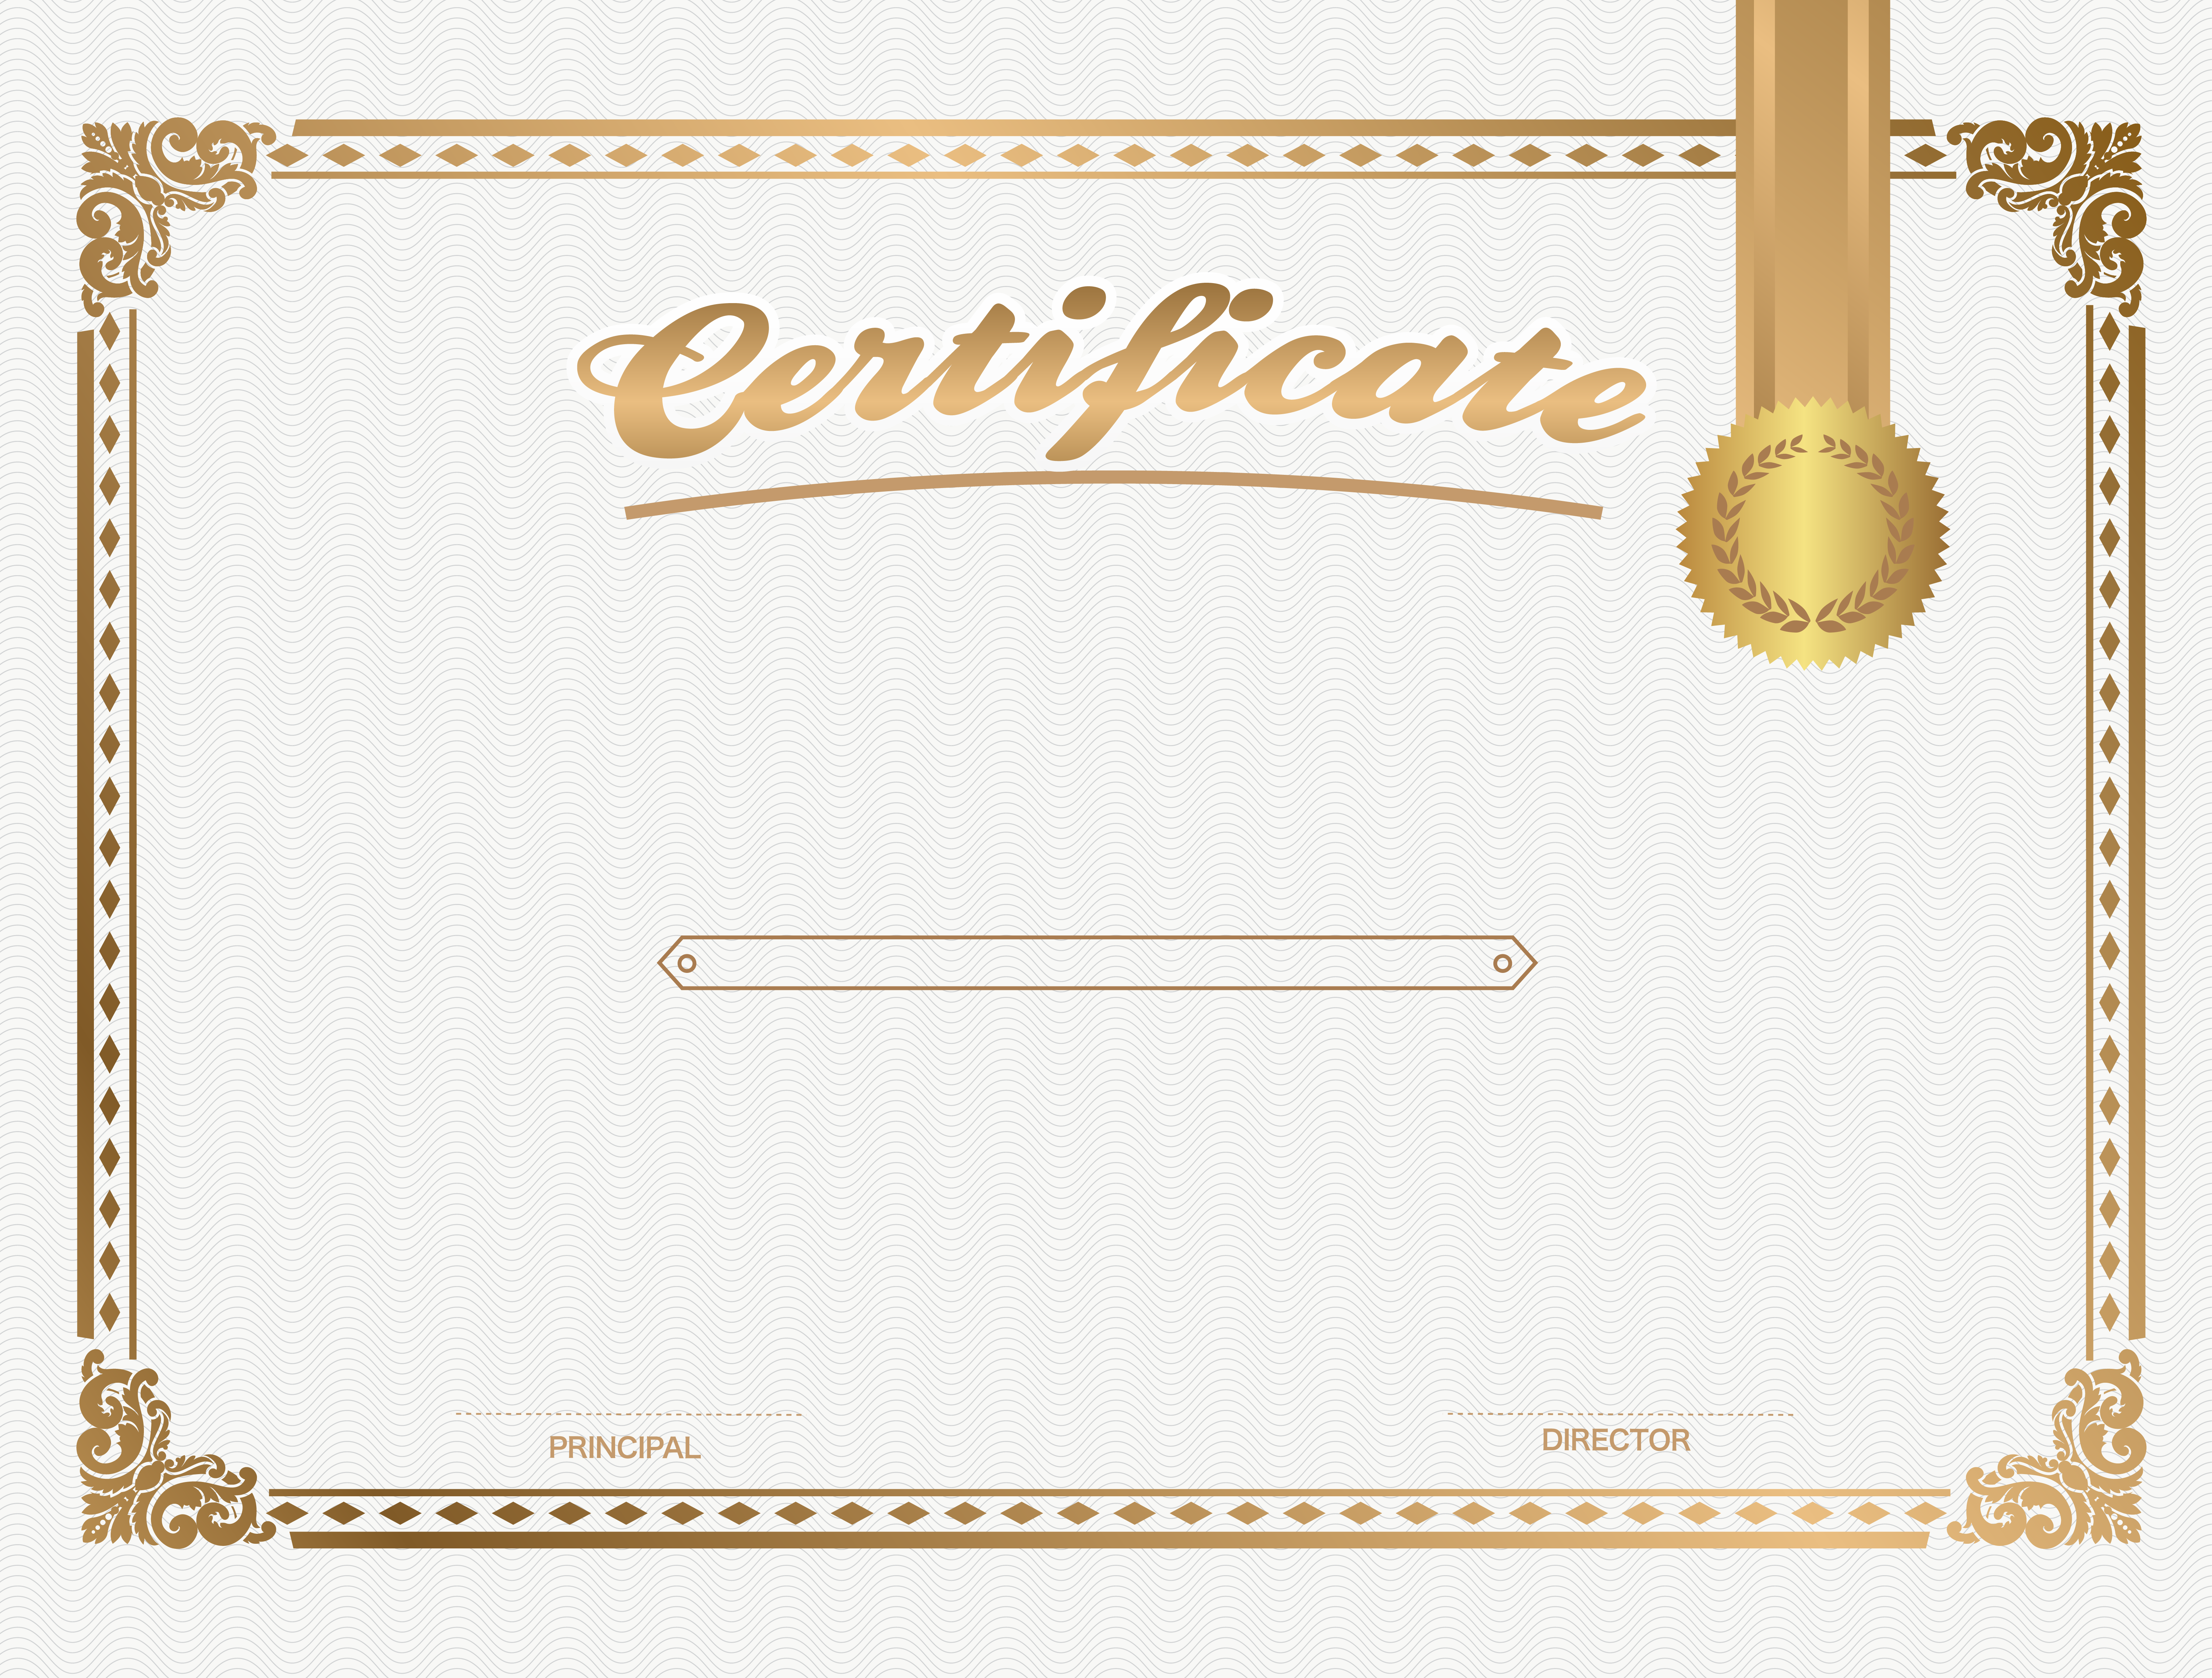 Certificate PNG Image